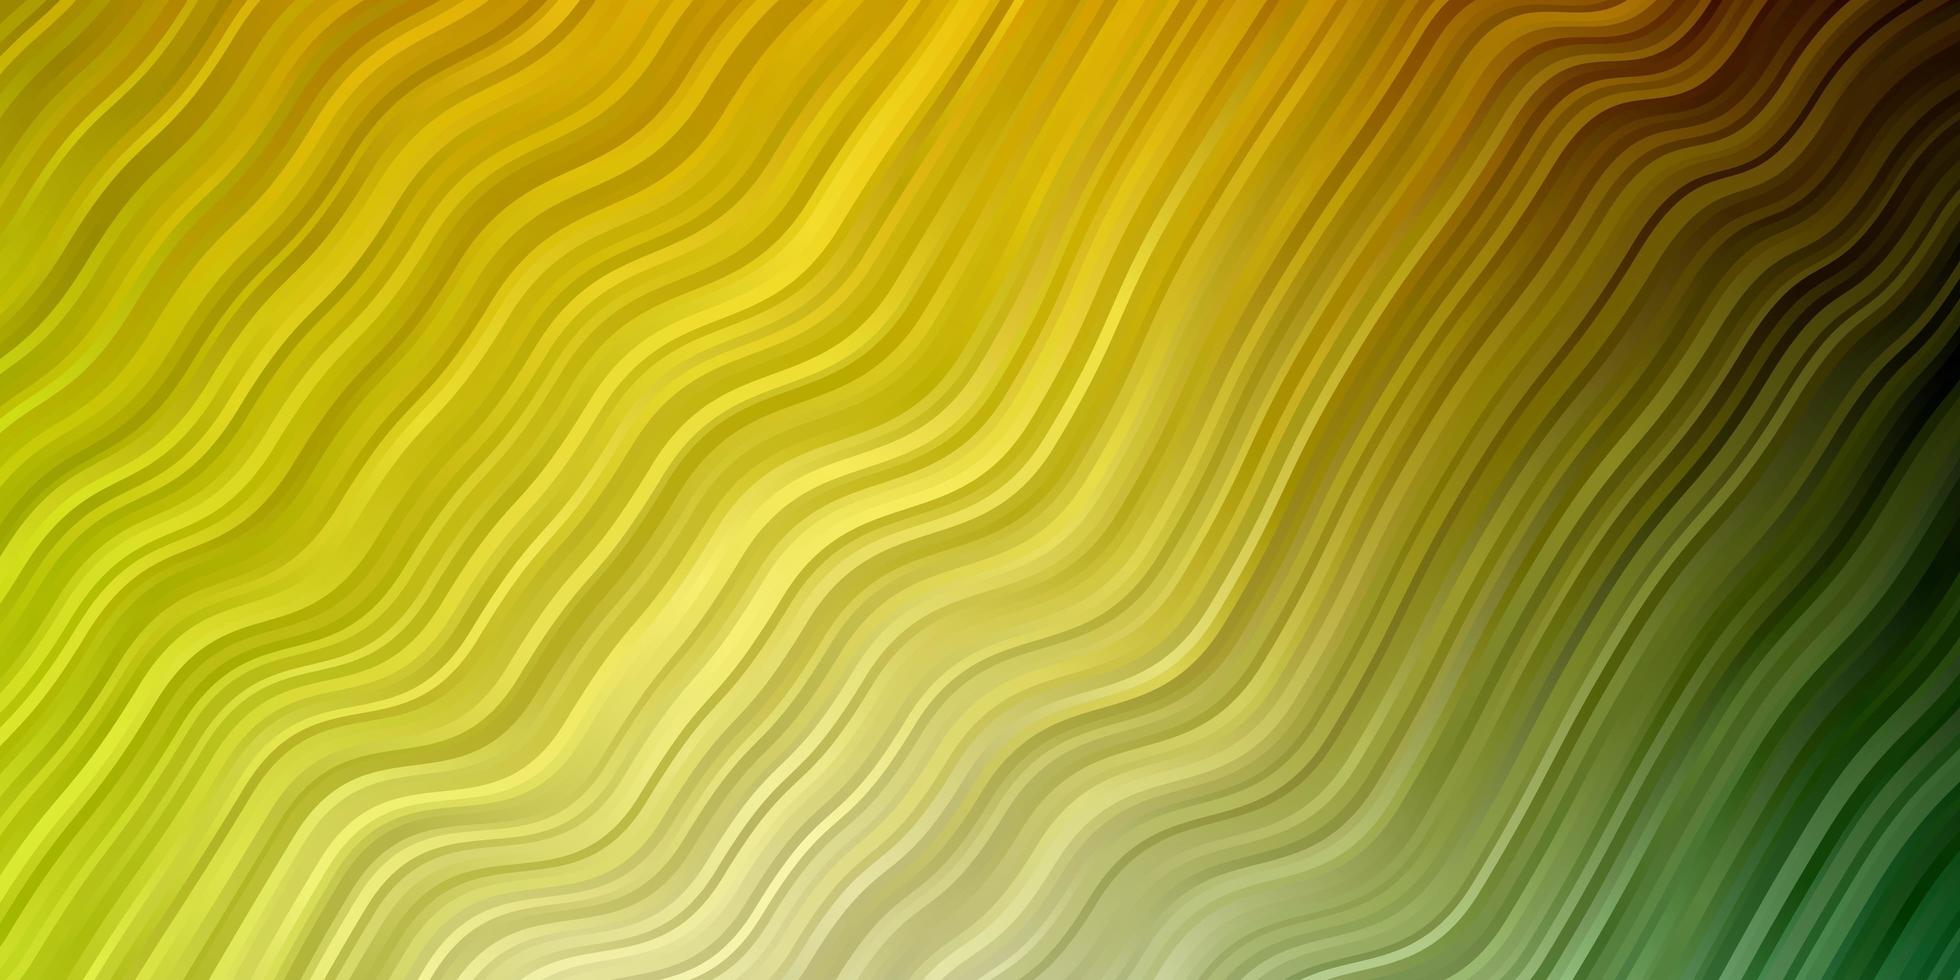 Light Green, Yellow vector backdrop with bent lines.